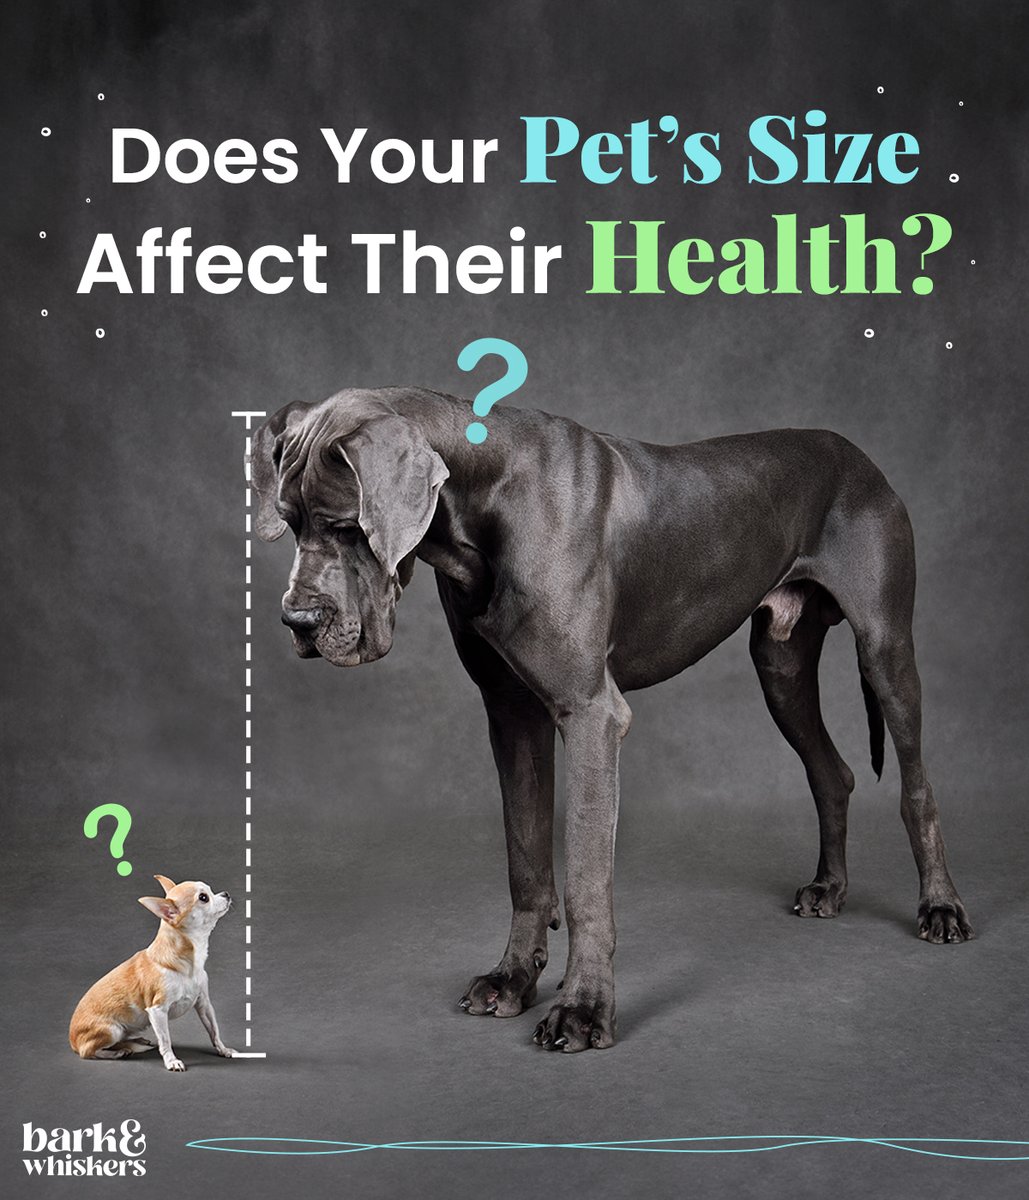 It’s common knowledge that small dogs typically live longer than large and giant breeds. But why? 🤔 A new study by researchers from the University of Washington sheds light on this matter. 🐕 Click here to learn more: bit.ly/3vPliJA #LargeDogs #Dog #DogsOfTwitter